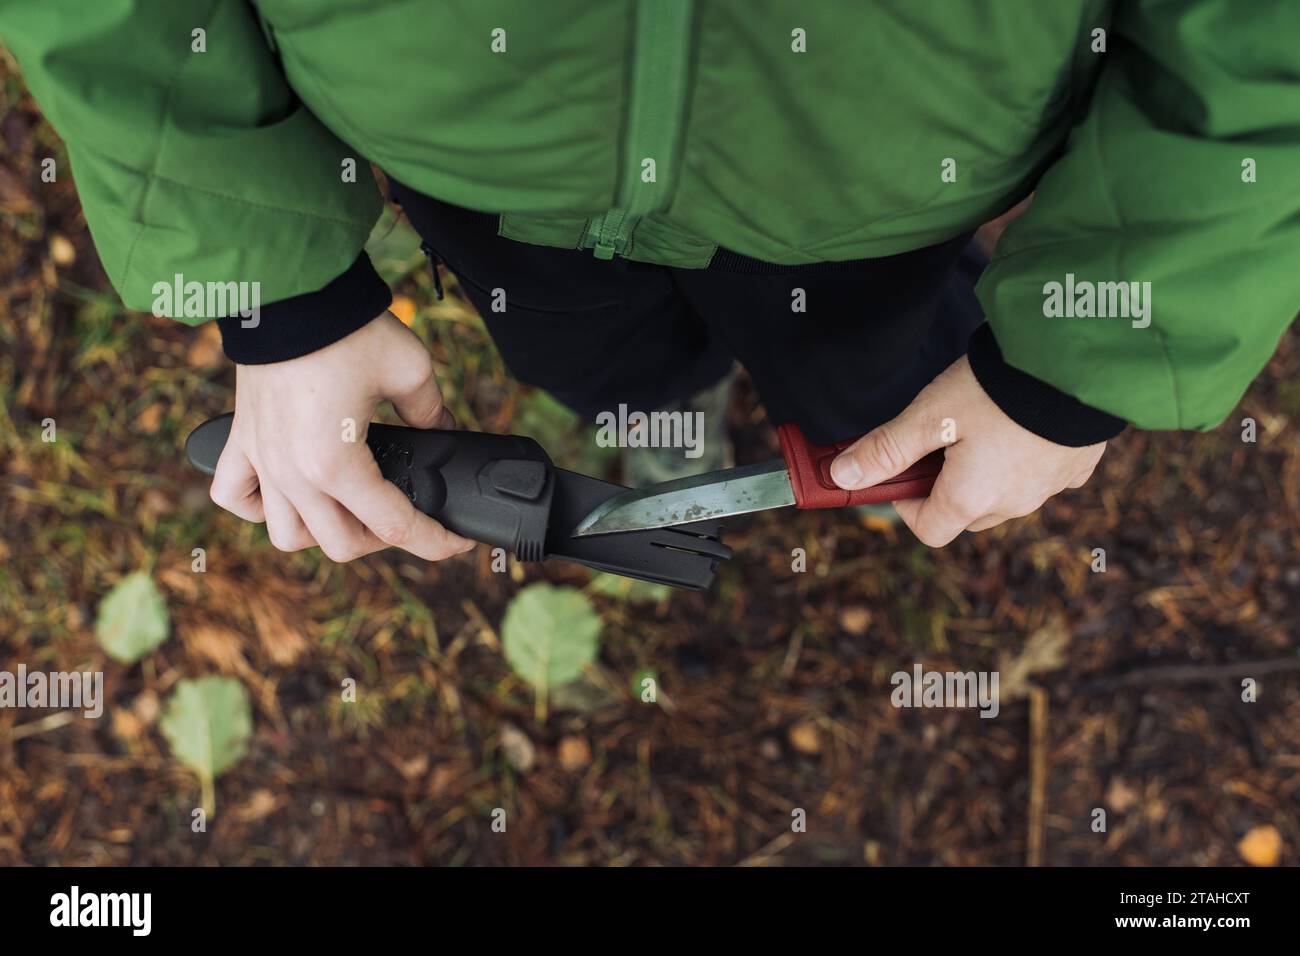 https://c8.alamy.com/comp/2TAHCXT/boy-holding-a-knife-ready-to-sharpen-a-stick-in-the-forest-2TAHCXT.jpg